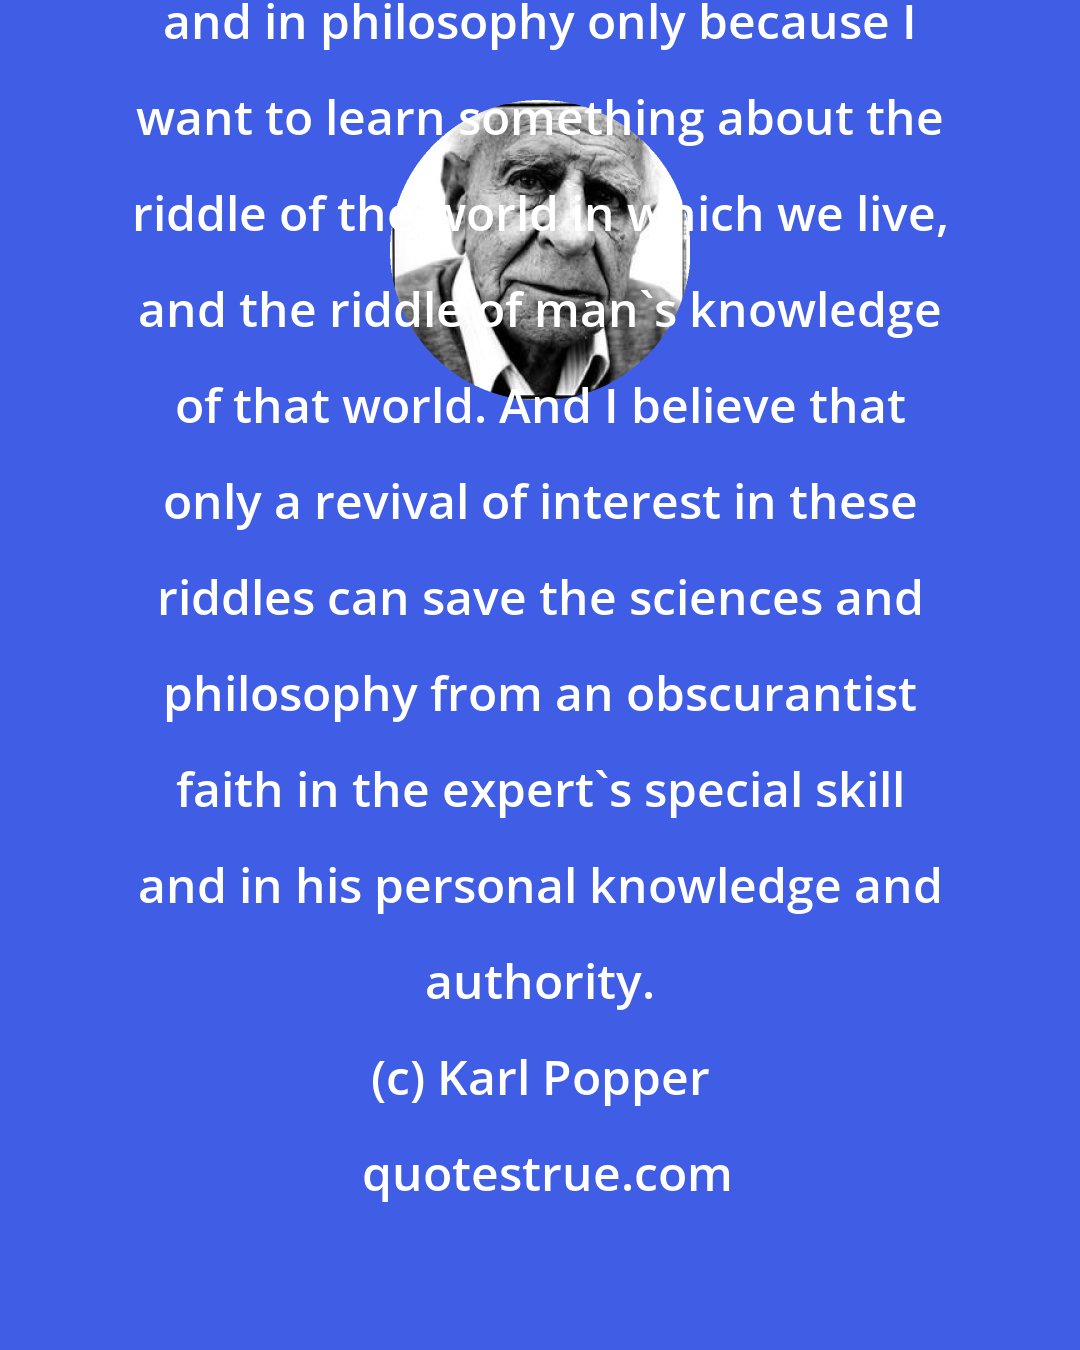 Karl Popper: For myself, I am interested in science and in philosophy only because I want to learn something about the riddle of the world in which we live, and the riddle of man's knowledge of that world. And I believe that only a revival of interest in these riddles can save the sciences and philosophy from an obscurantist faith in the expert's special skill and in his personal knowledge and authority.